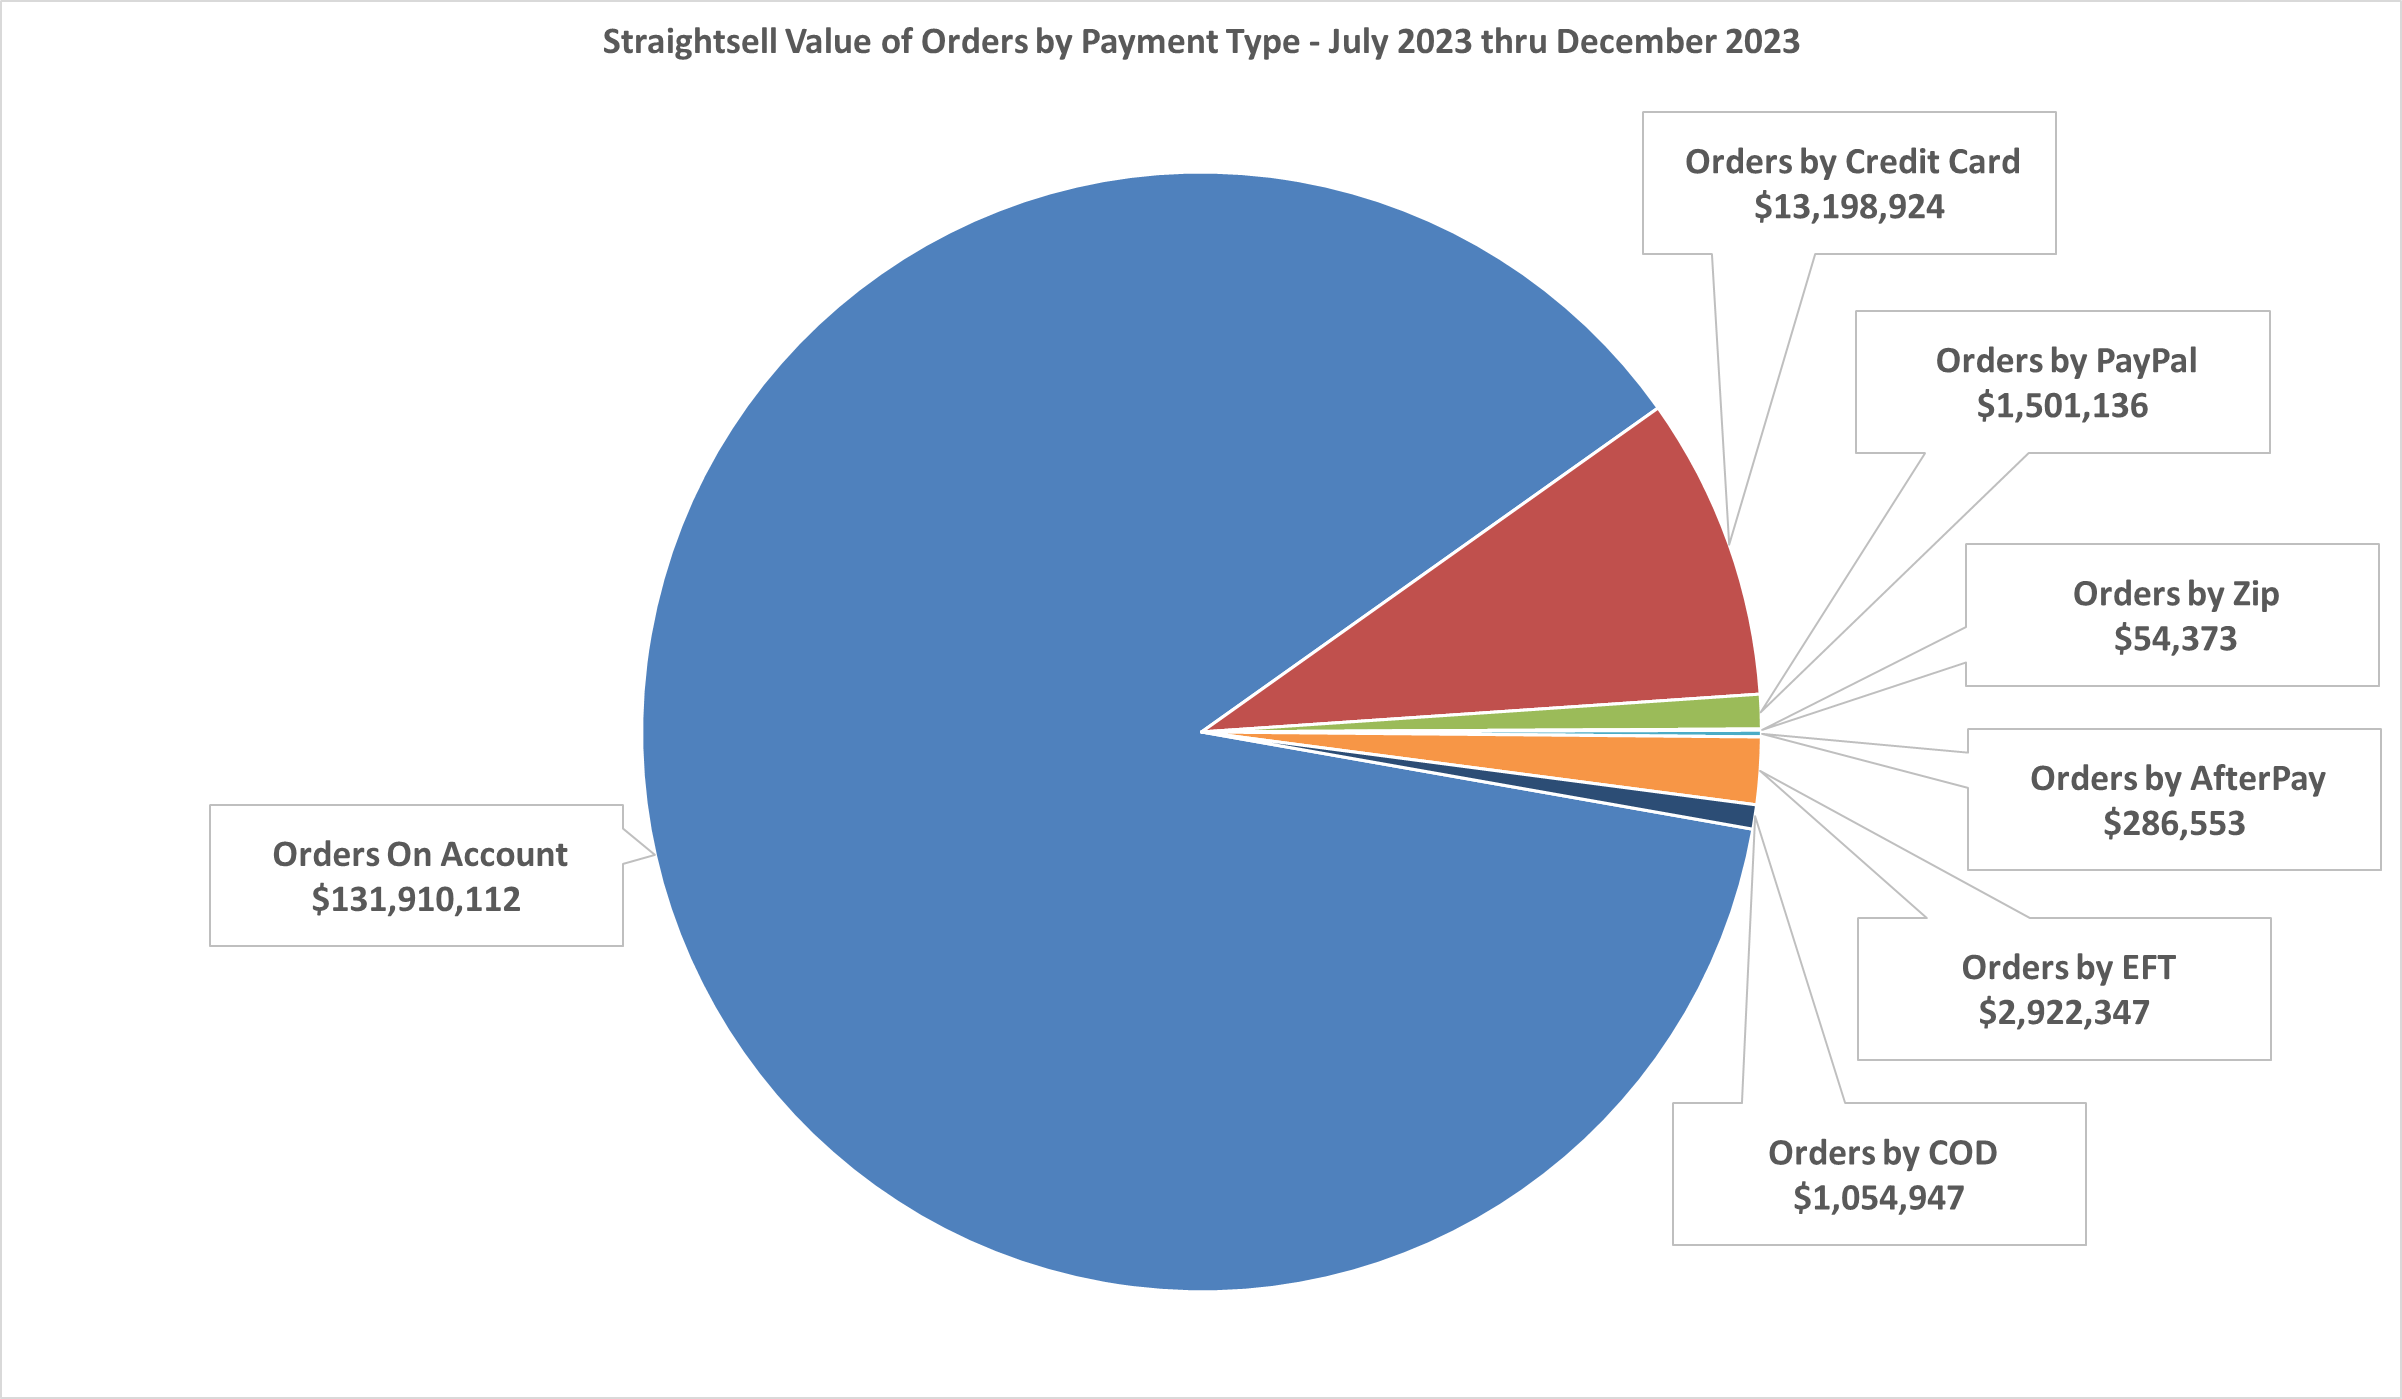 Straightsell Value of Orders by Payment Type - July 2023 thru December 2023